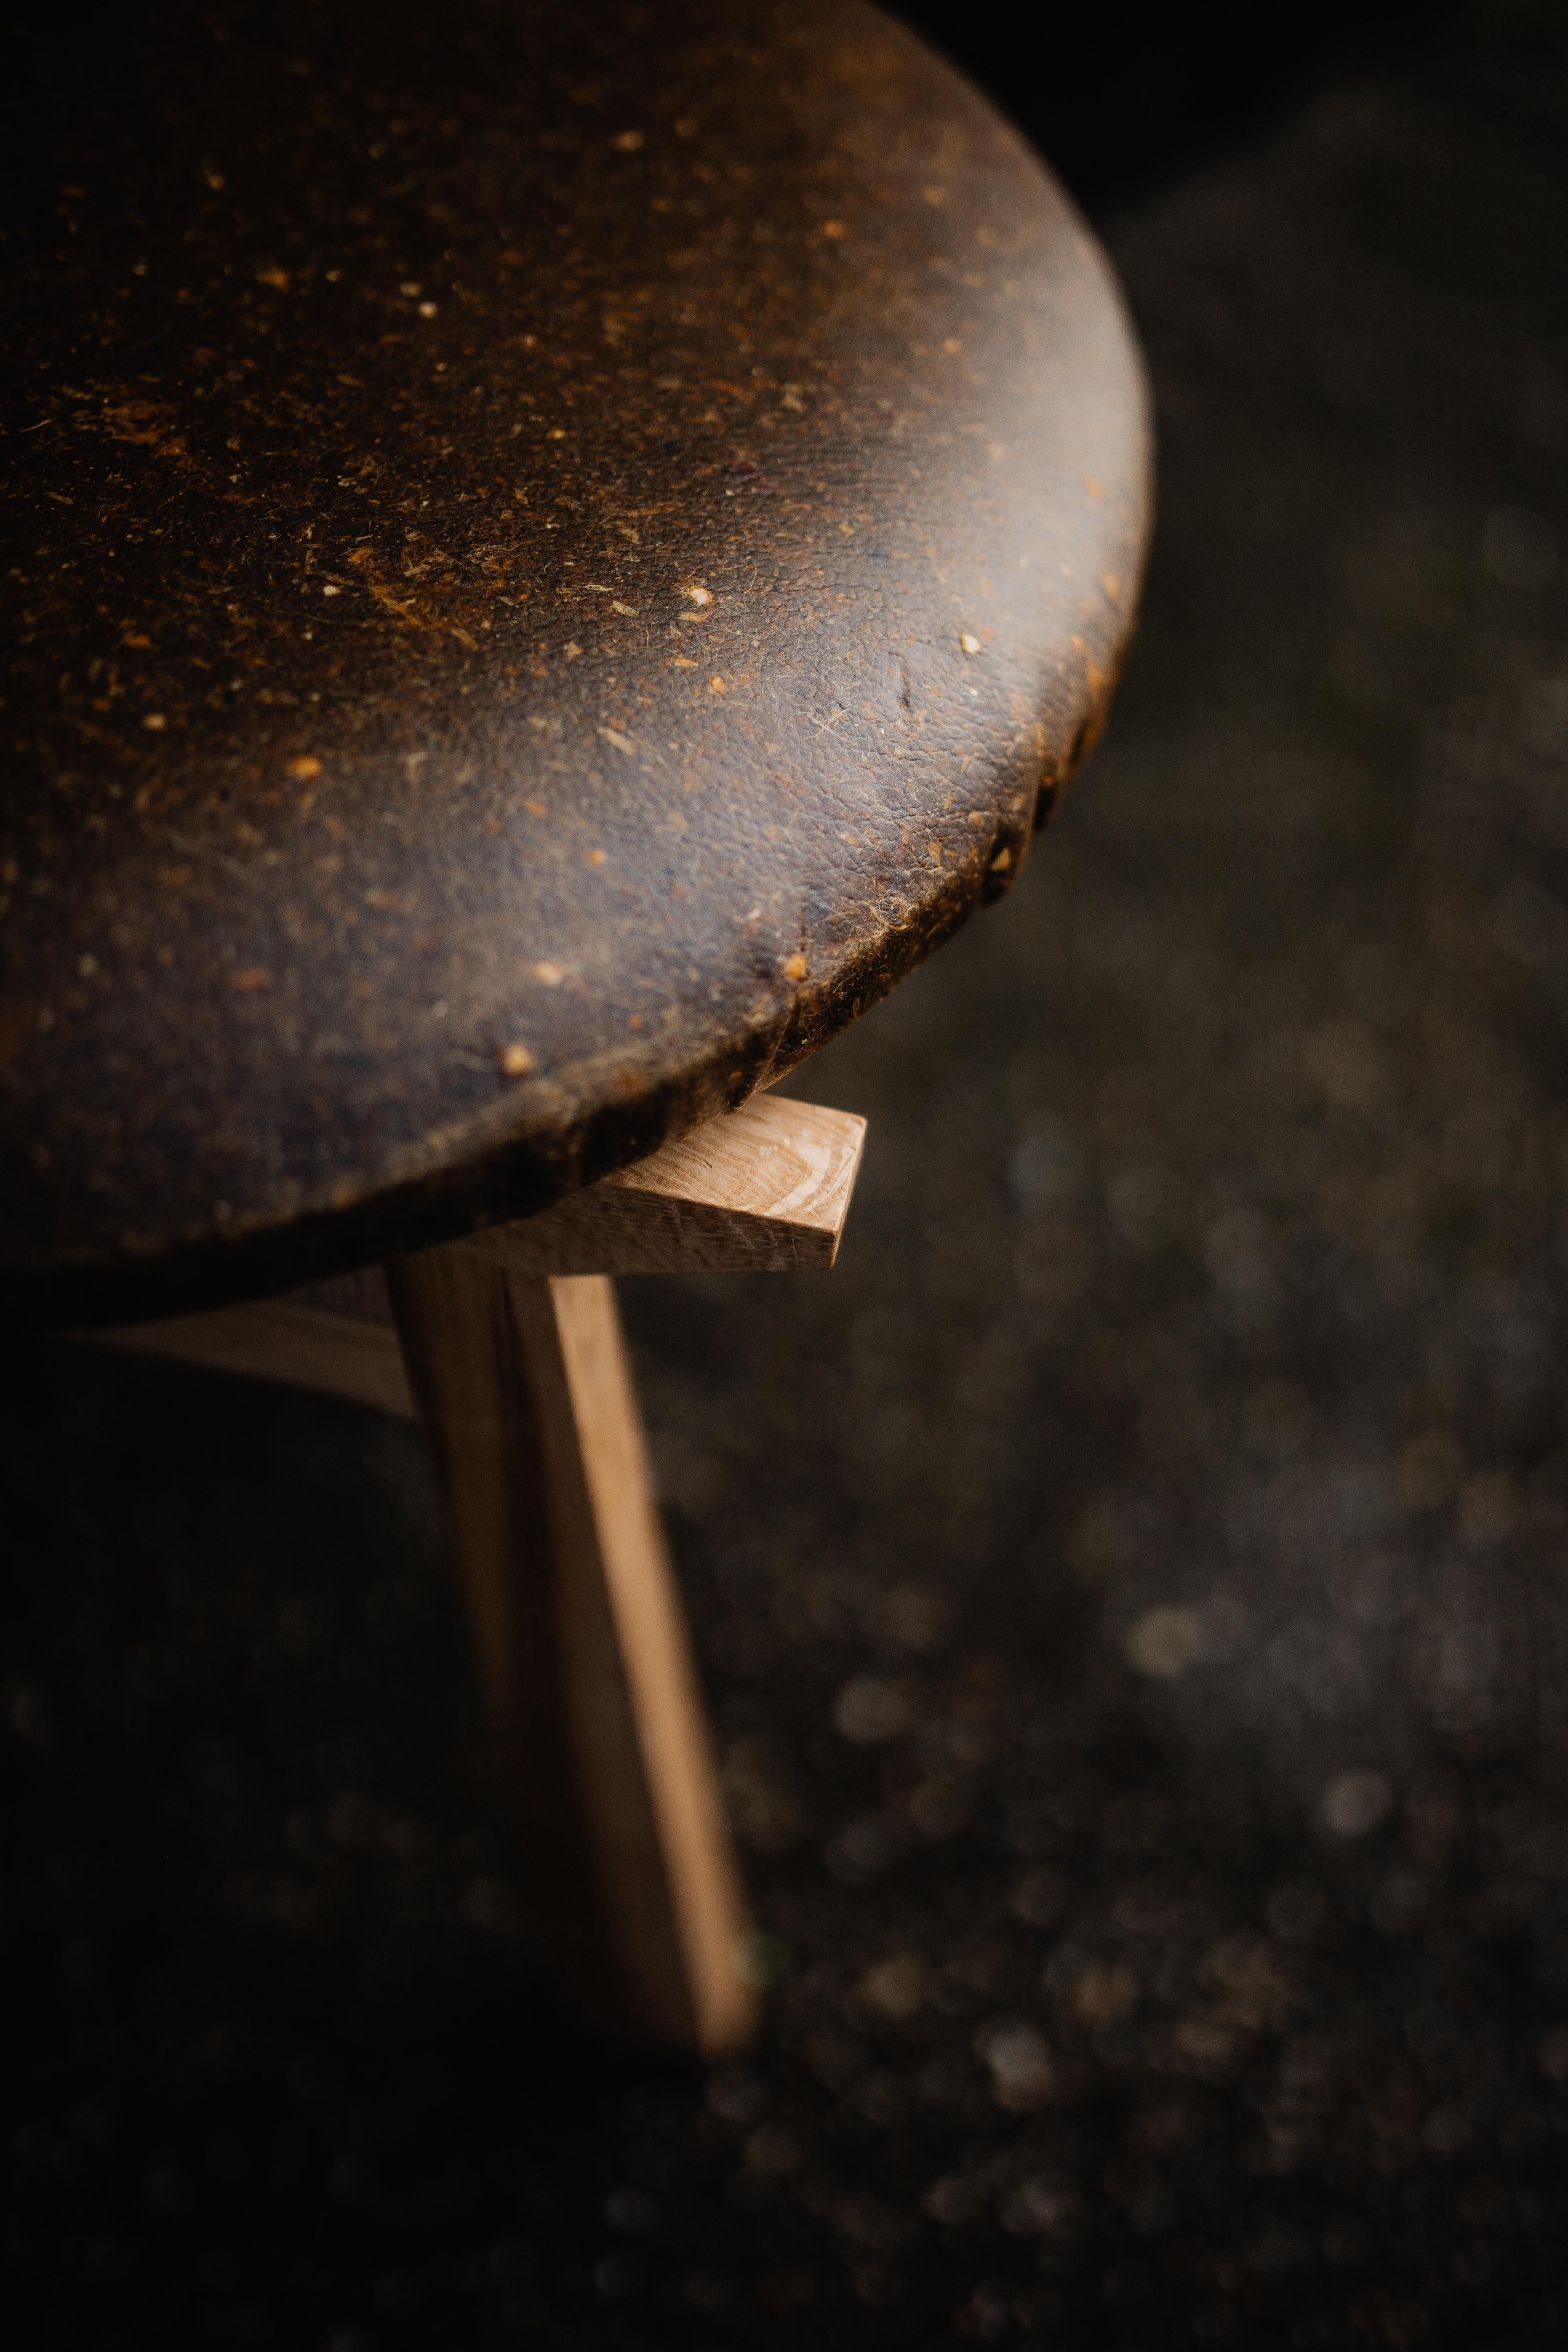 This dining chair is hand made in hard wood that is sustainably sourced, covered with a natural oil to bring out the woods natural colors and grains. The seat is made from Mango leather from a company called - Fruitleather 

This furniture piece was